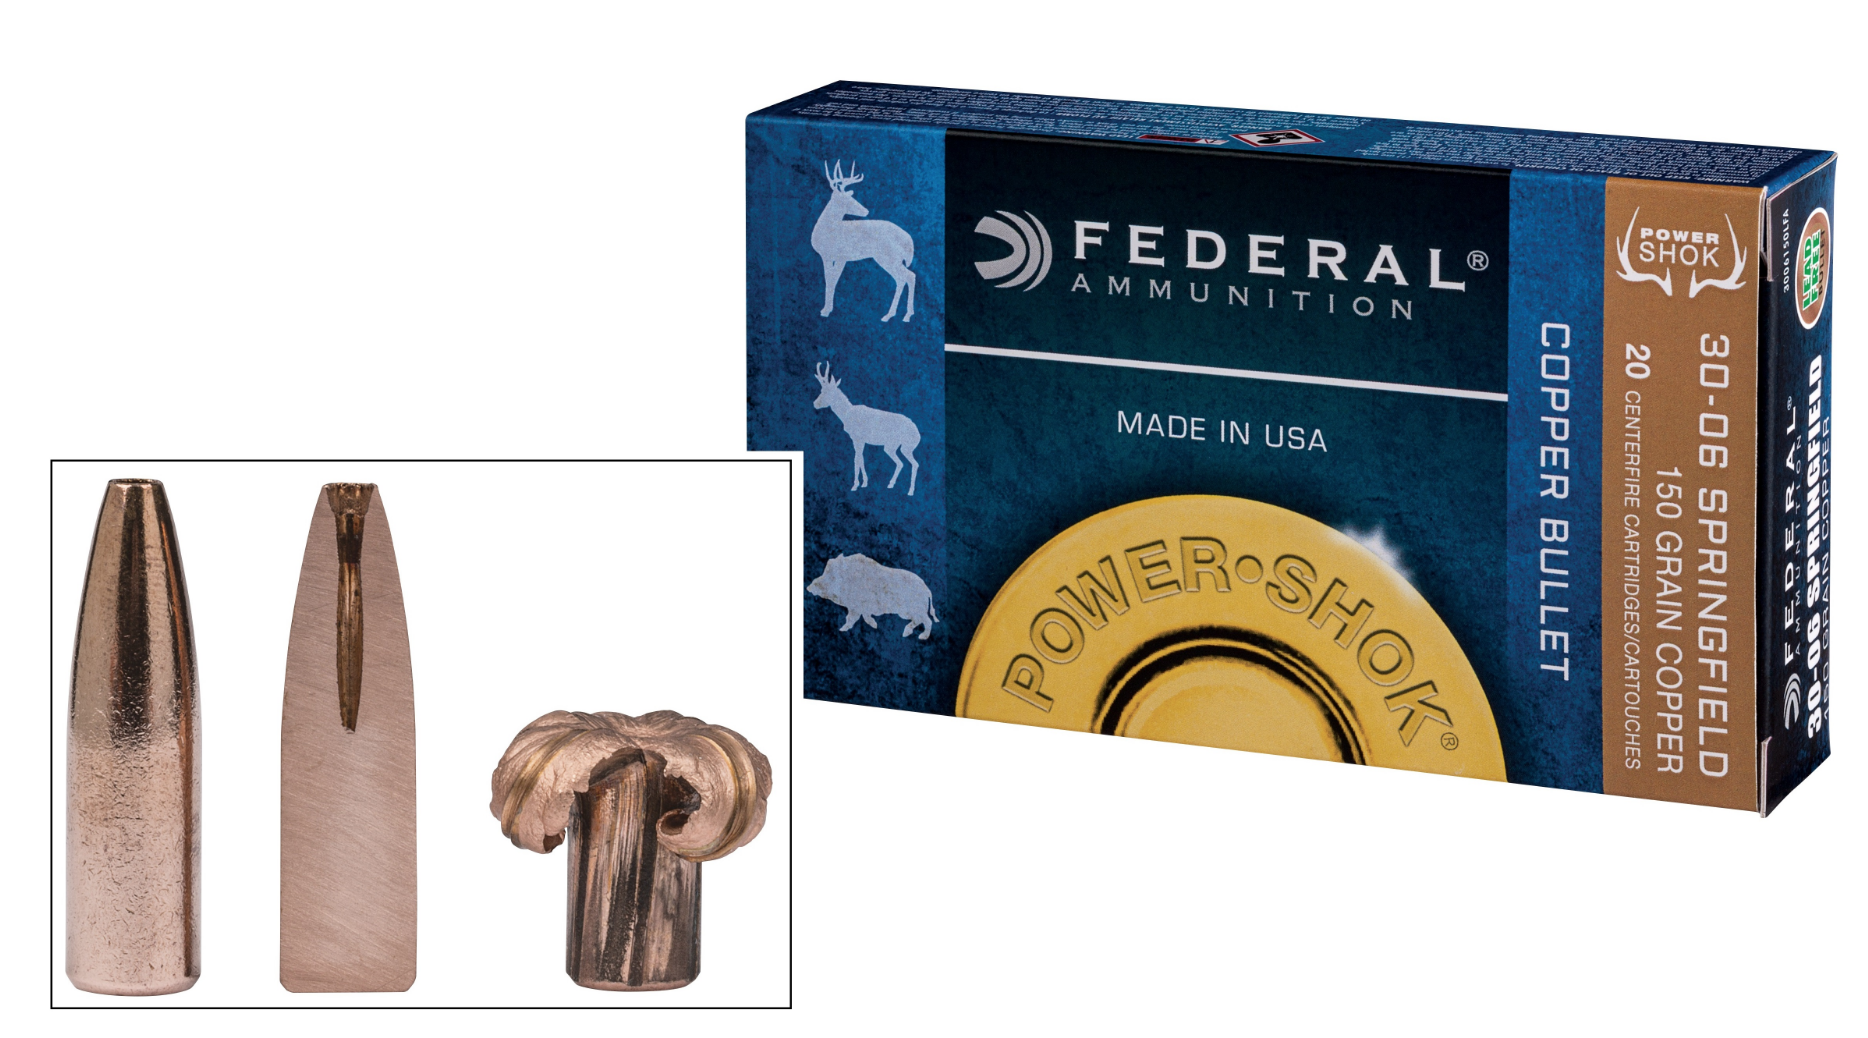 Introducing The Federal Power-Shok Copper